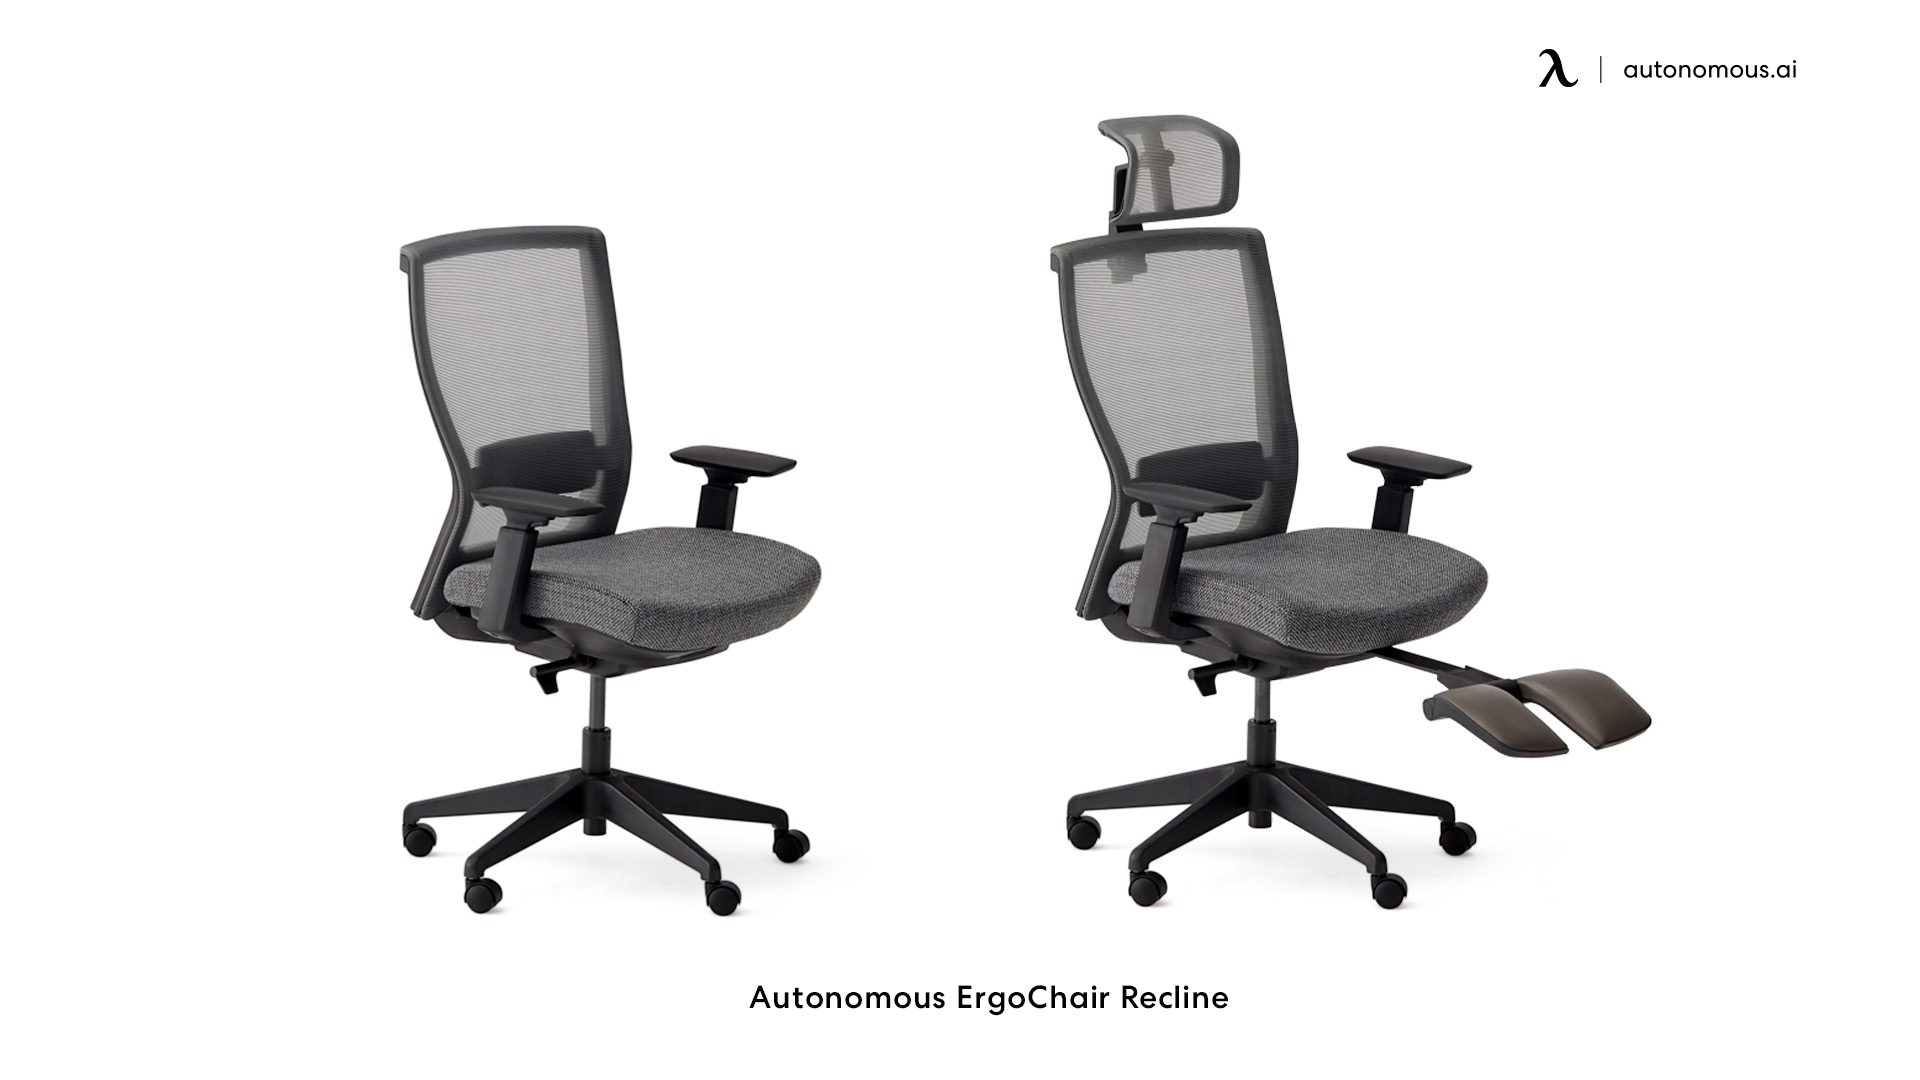 ErgoChair Recline office chairs with arms